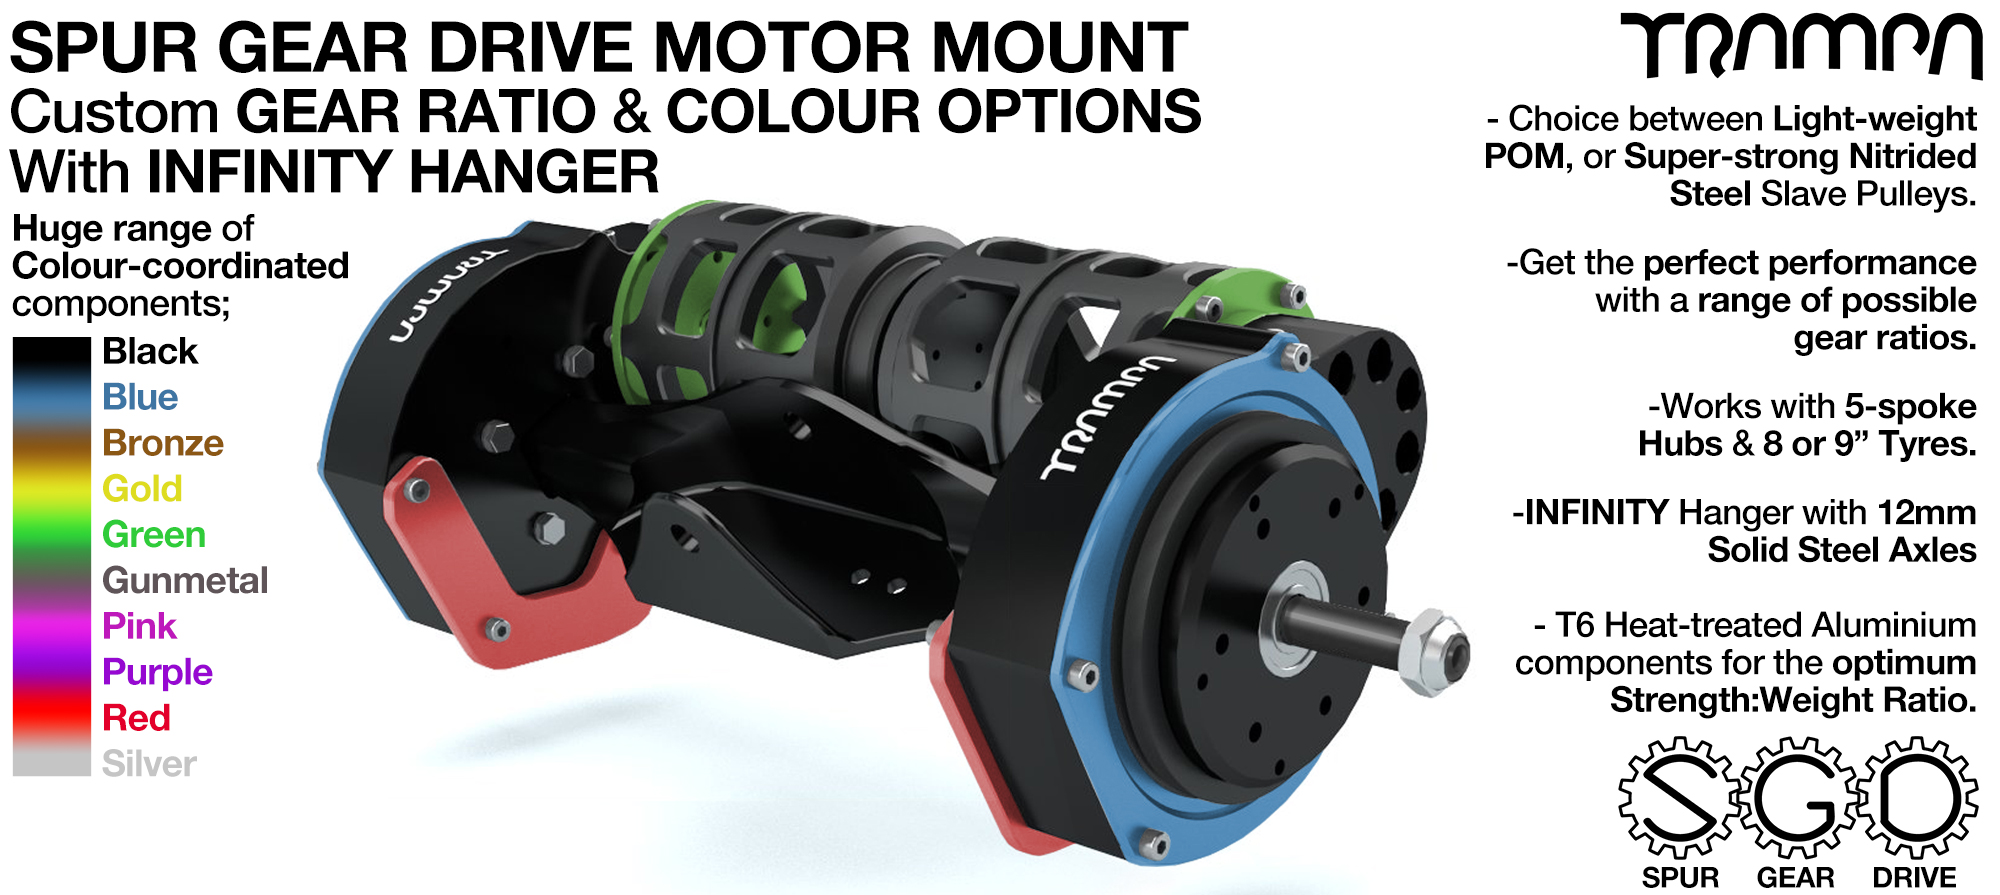 Mountainboard Spur Gear Drive TWIN with PULLEYS & FILTERS Mounted on a INFINITY Hanger